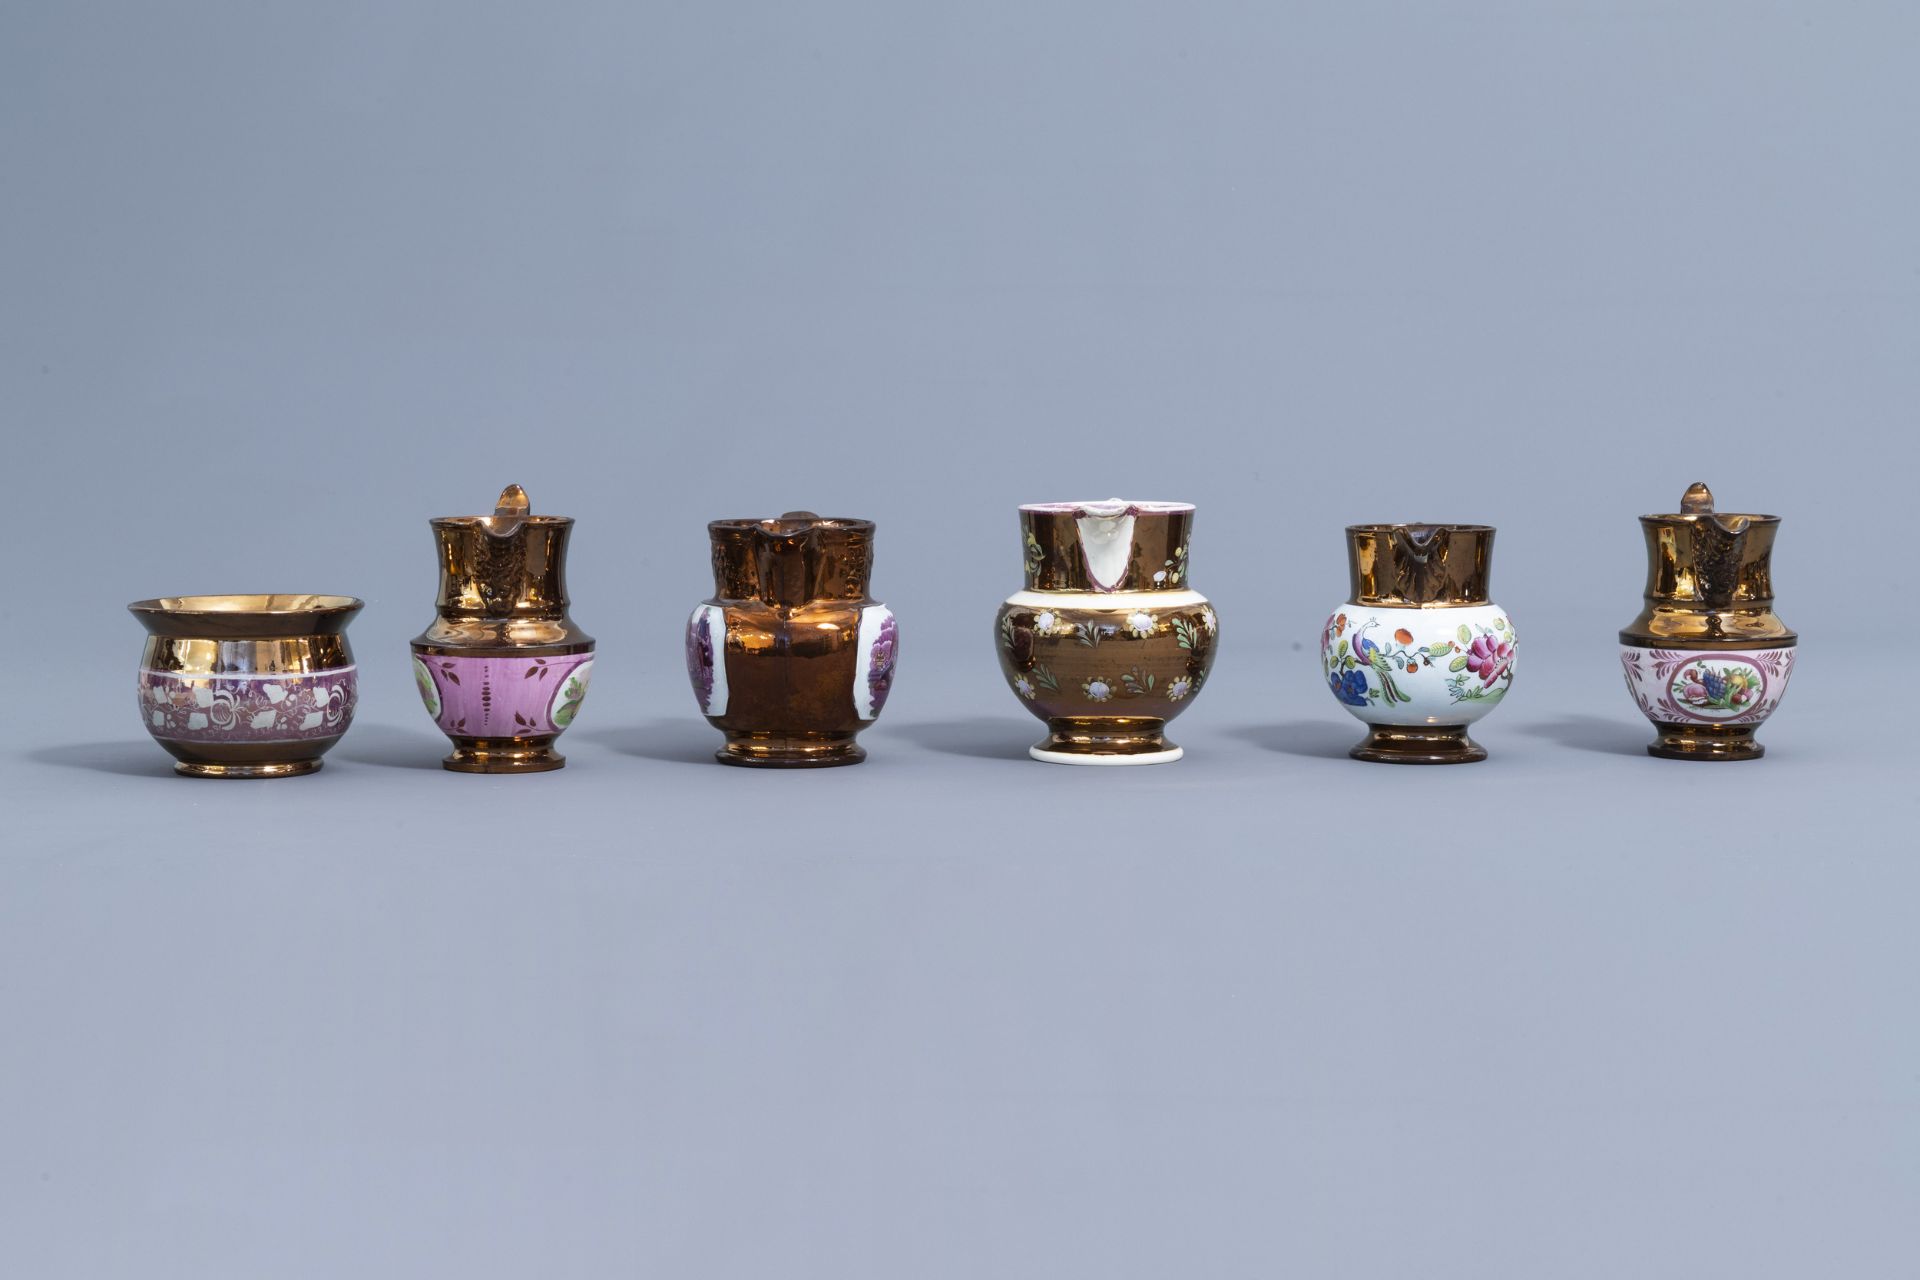 A varied collection of English lustreware items, 19th C. - Image 33 of 44